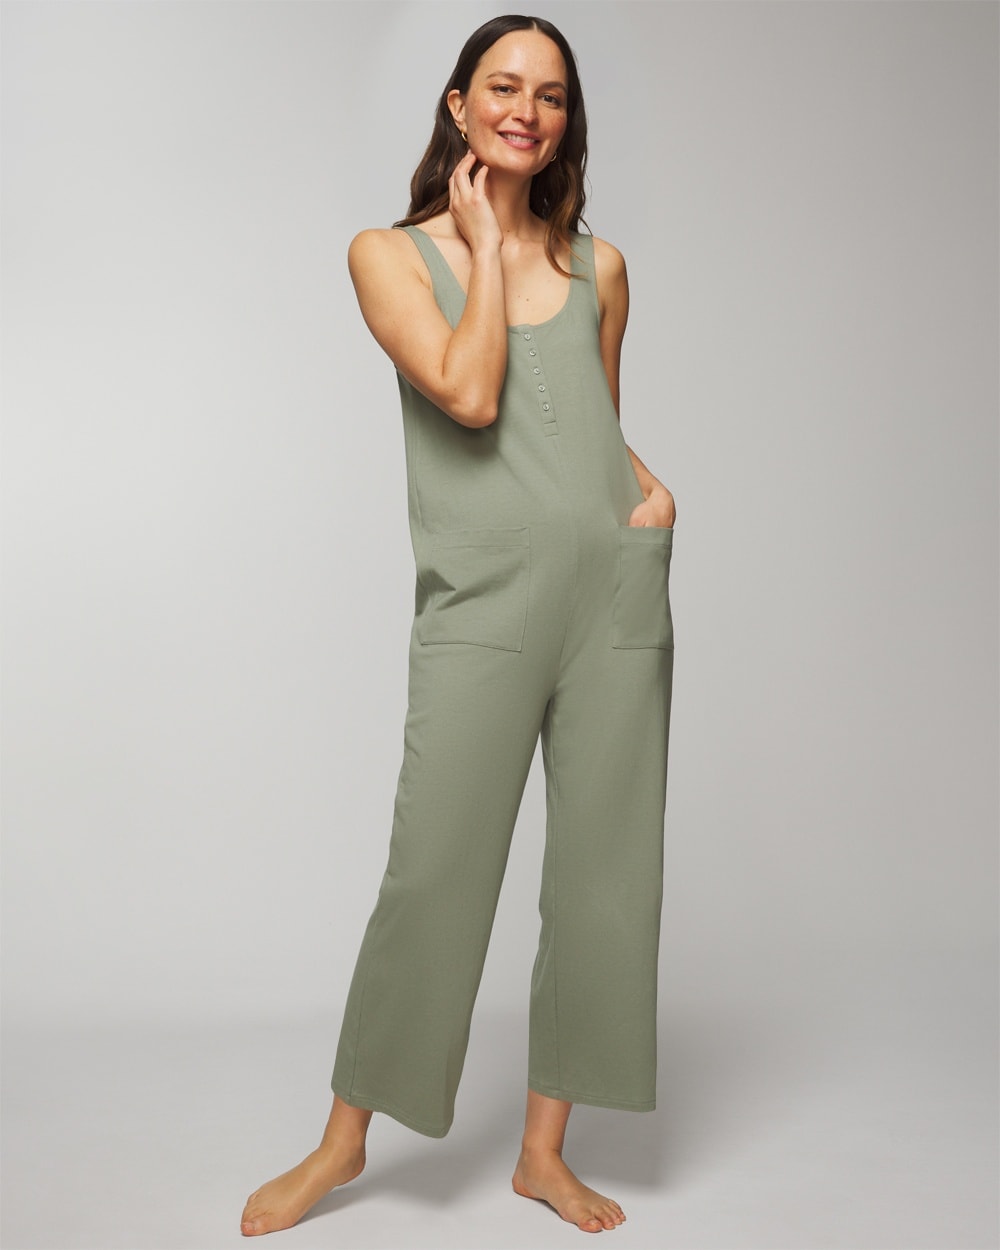 Most Loved Cotton Jumpsuit